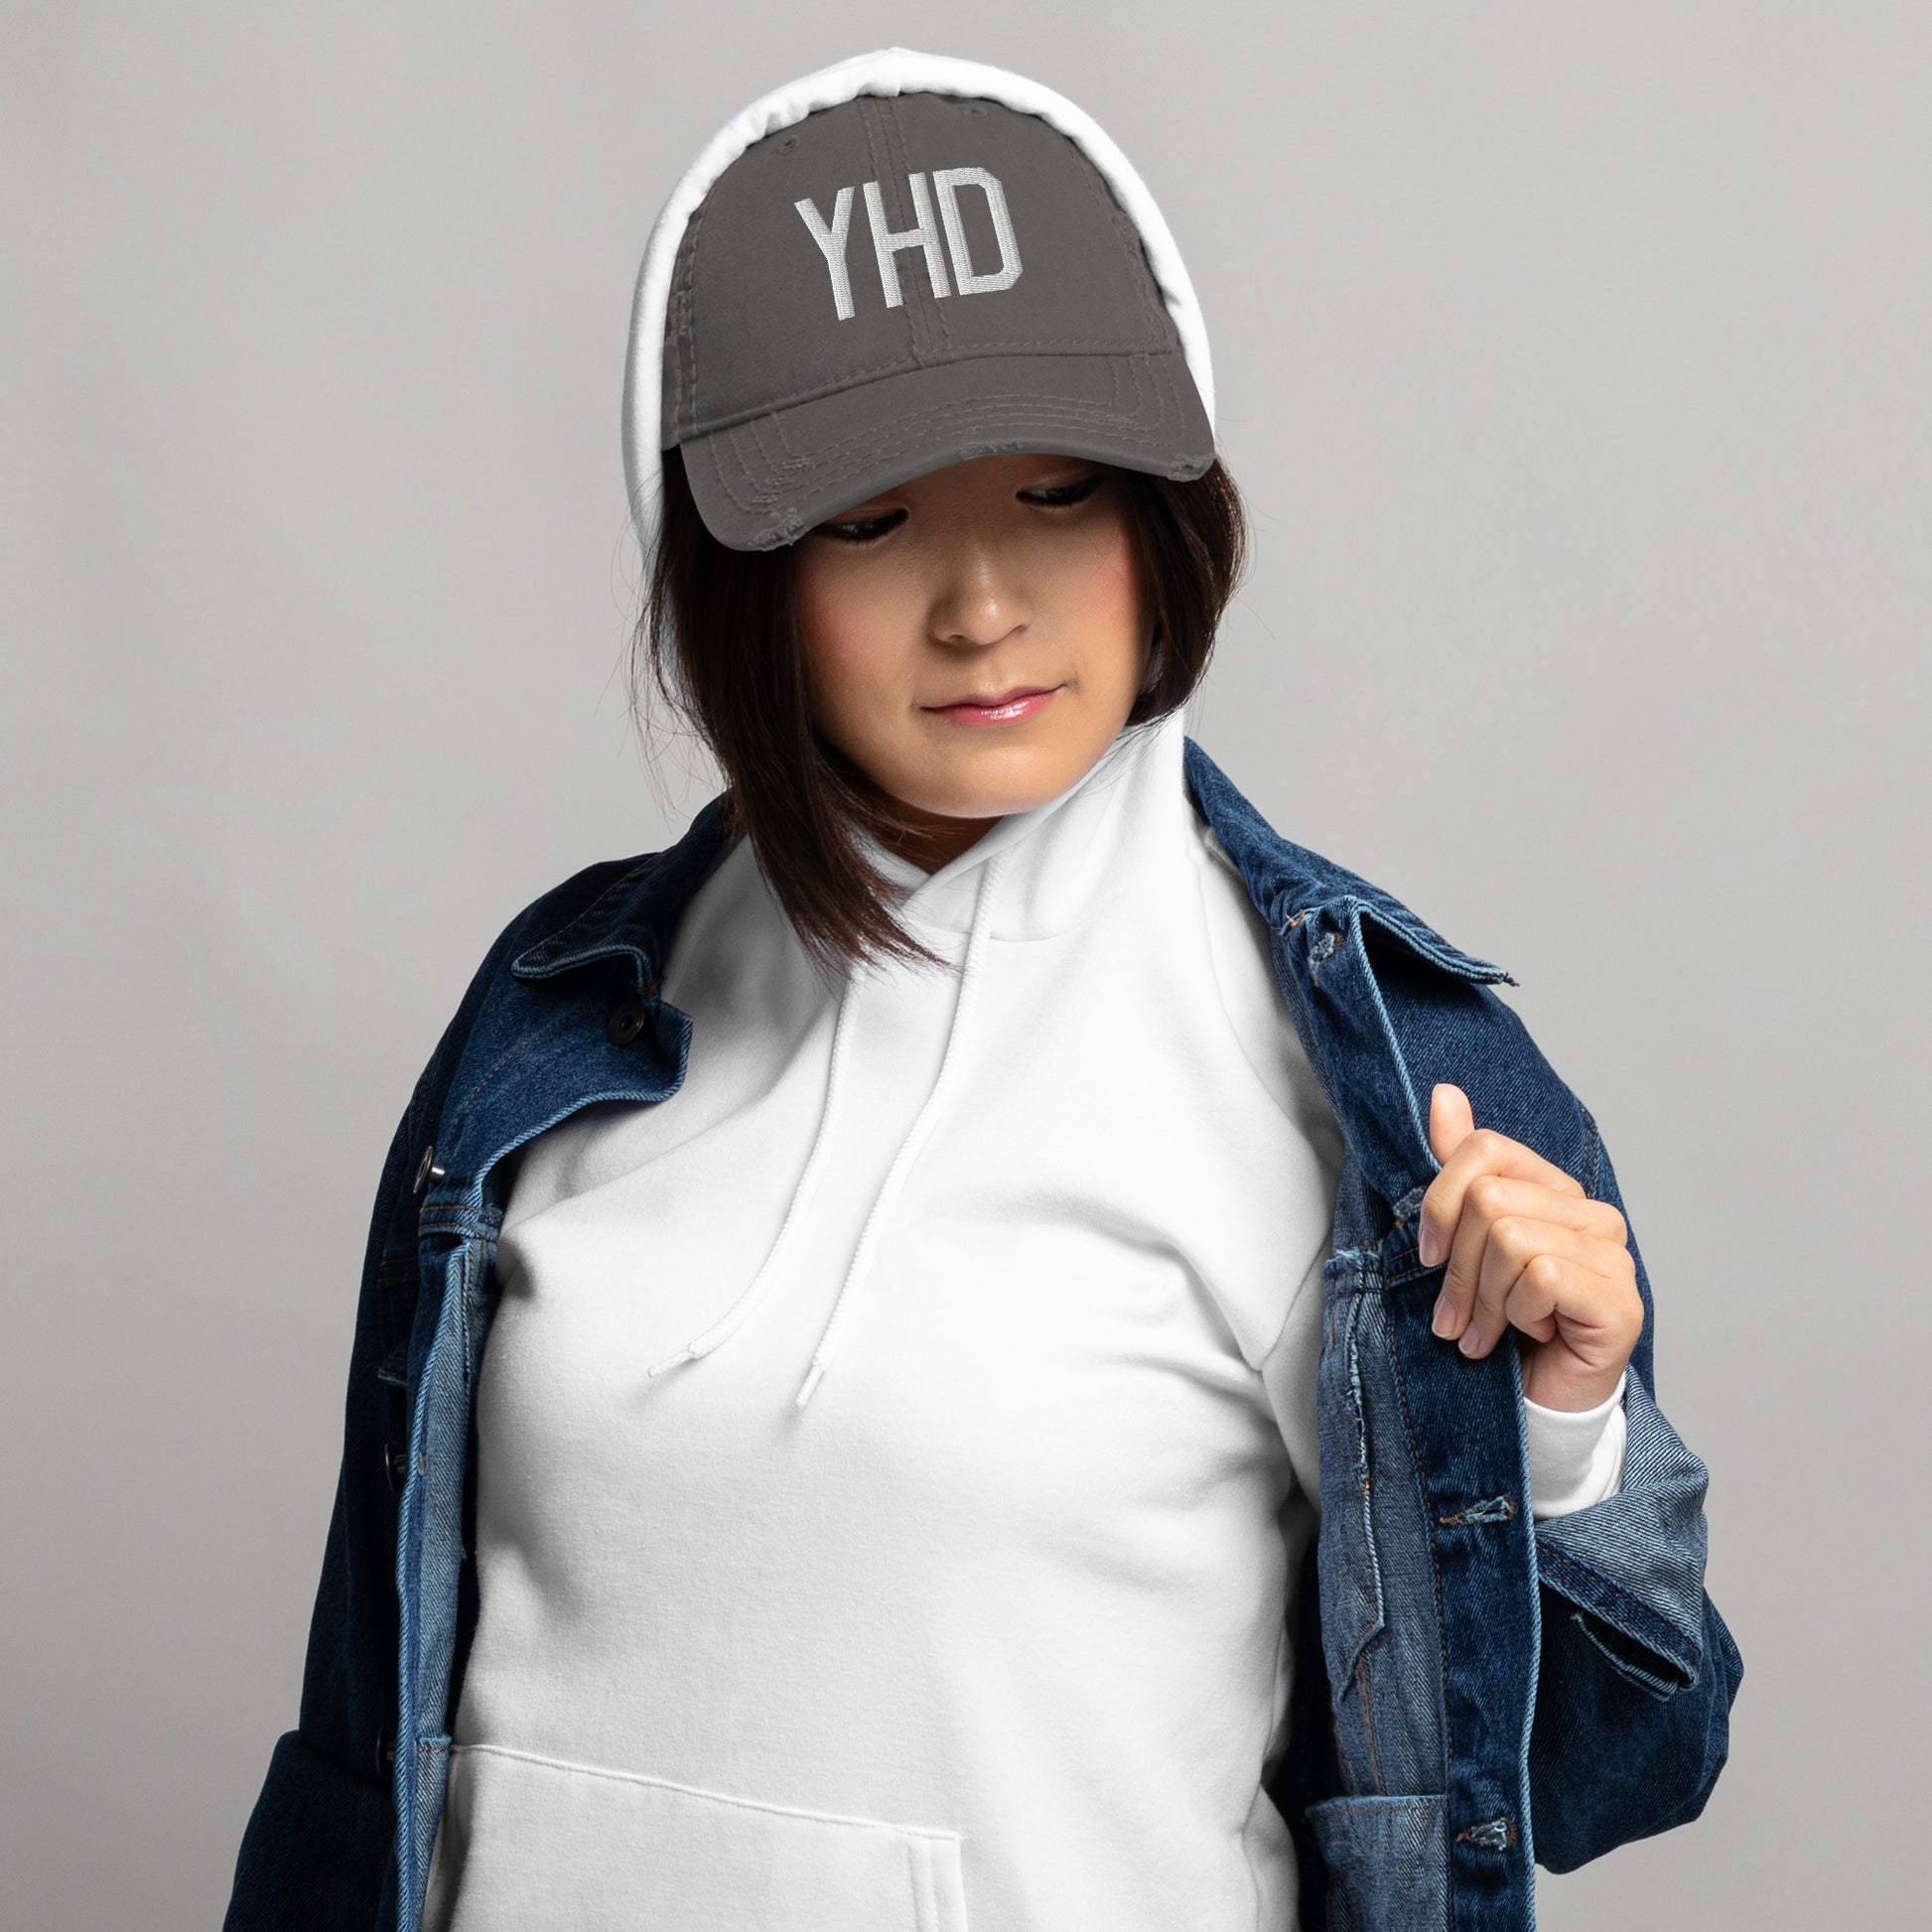 Airport Code Distressed Hat - White • YHD Dryden • YHM Designs - Image 06